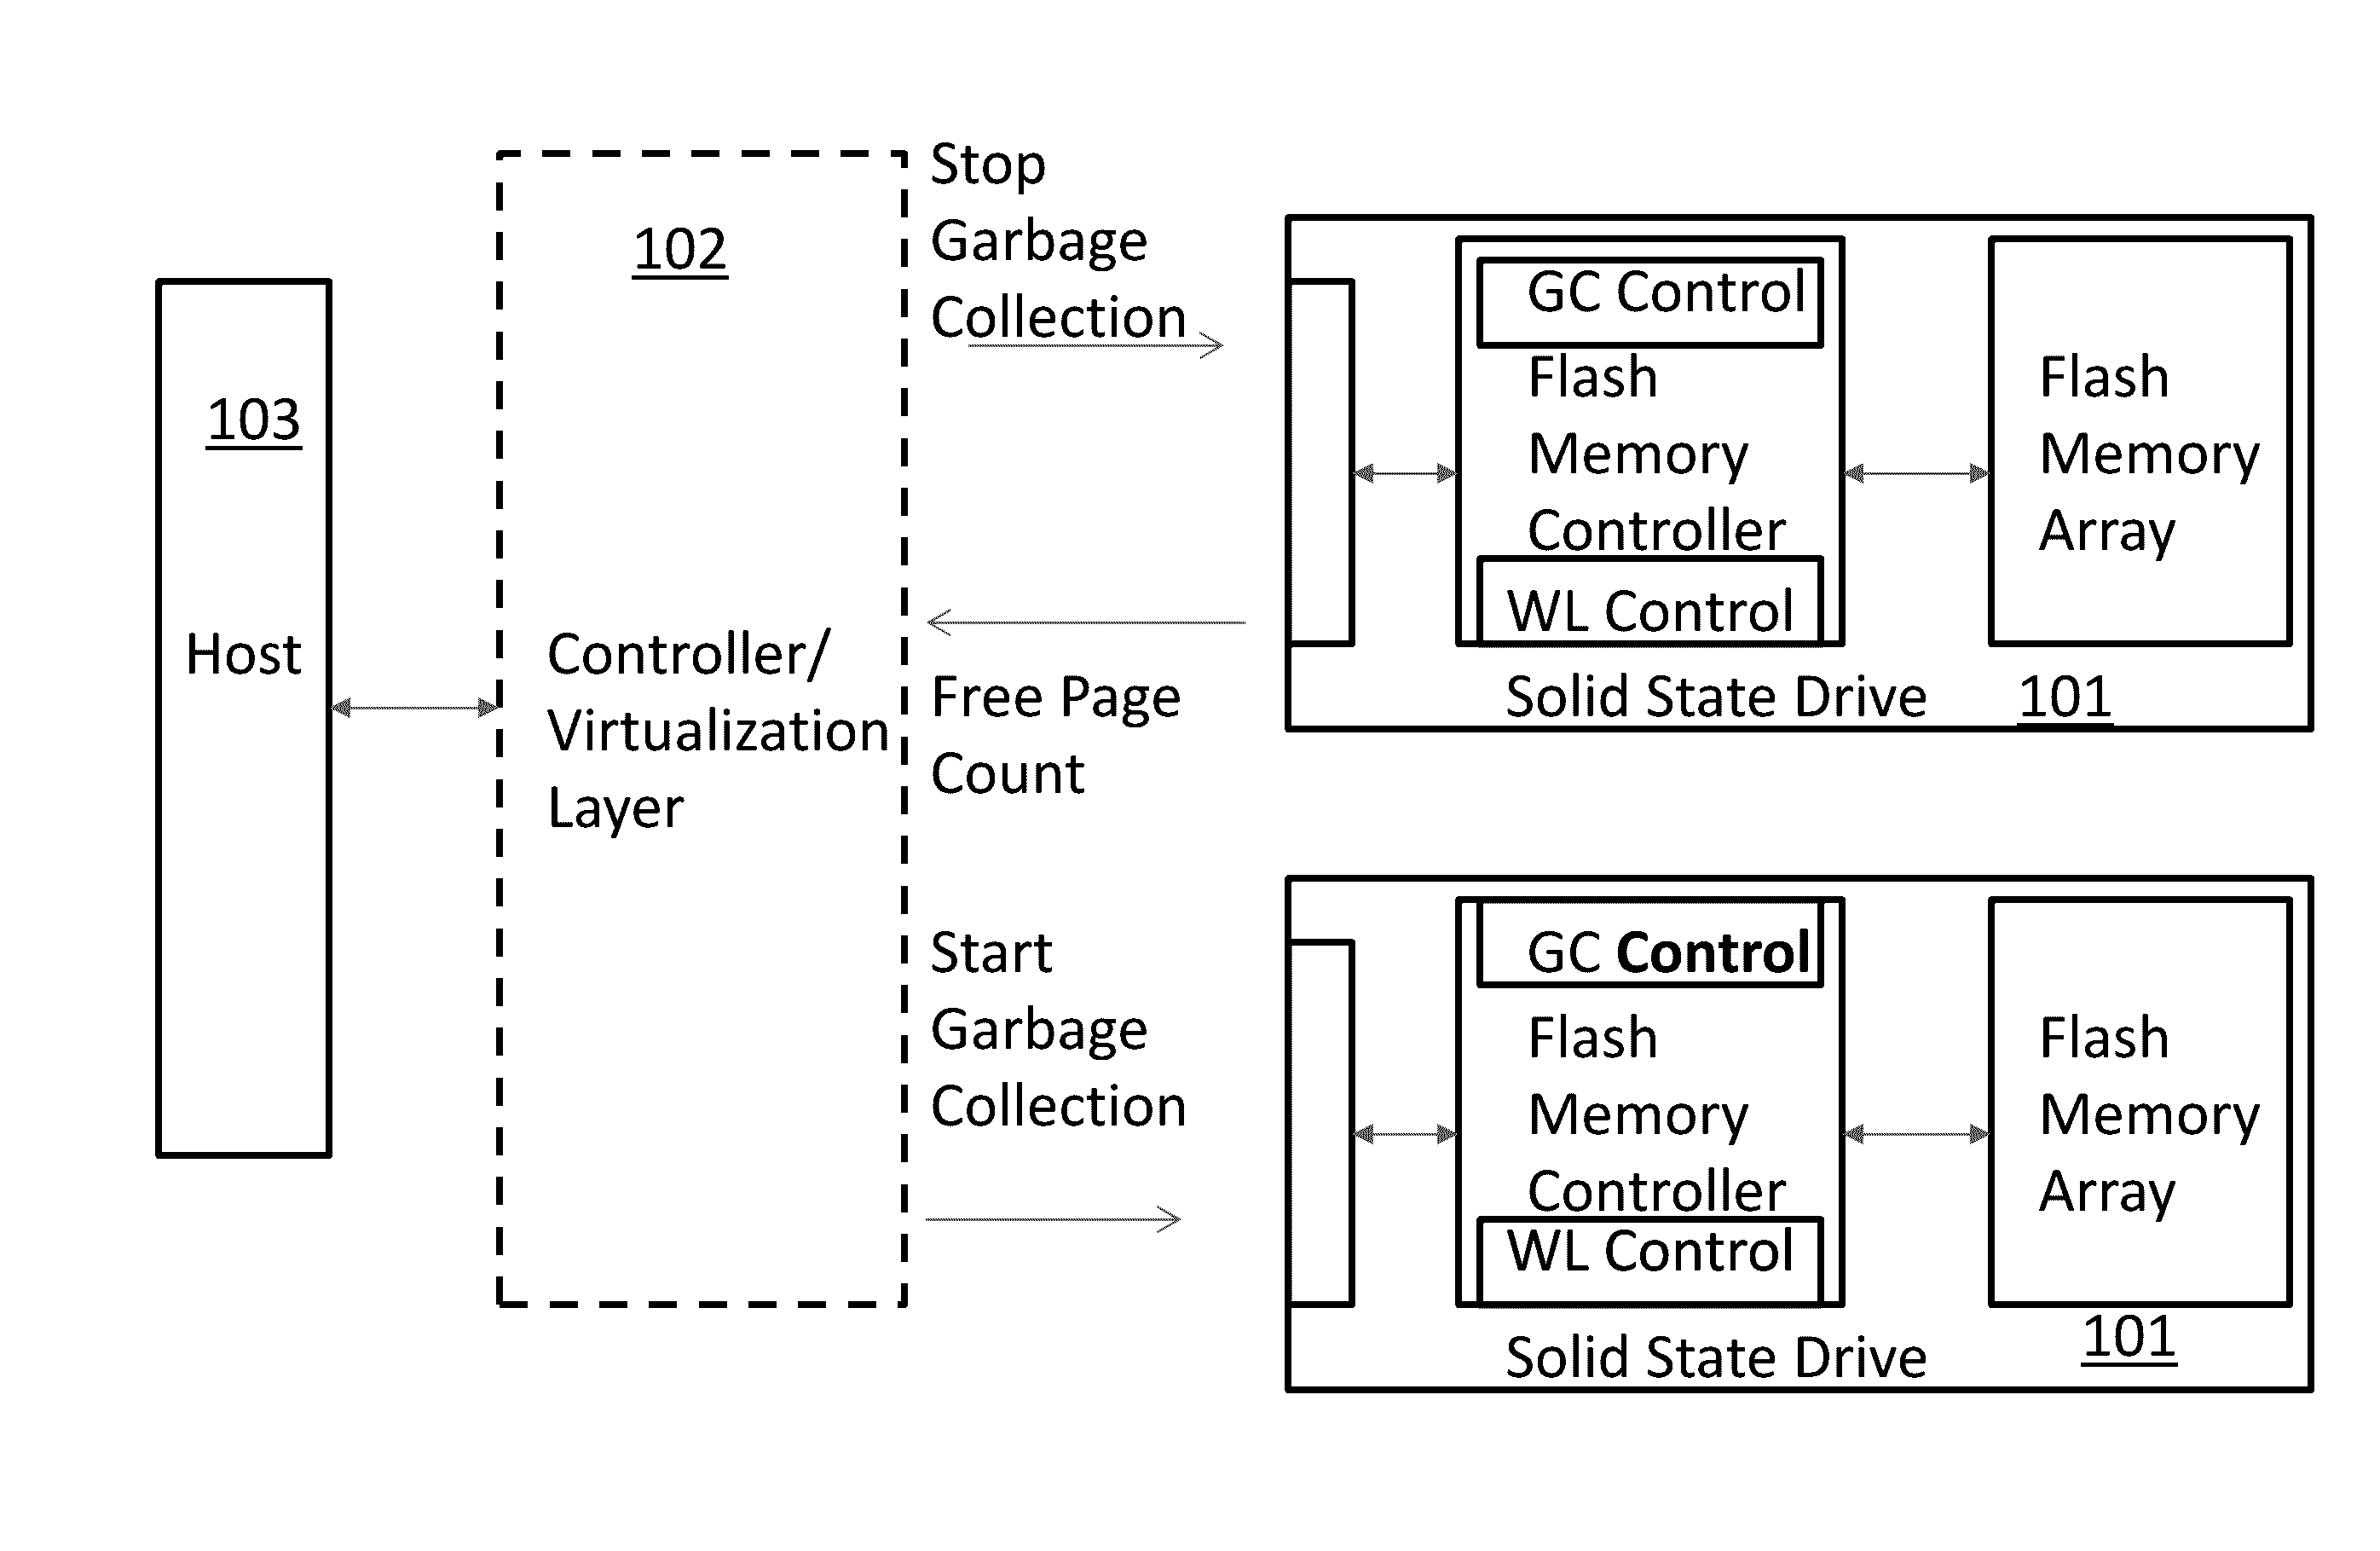 Pool level garbage collection and wear leveling of solid state devices